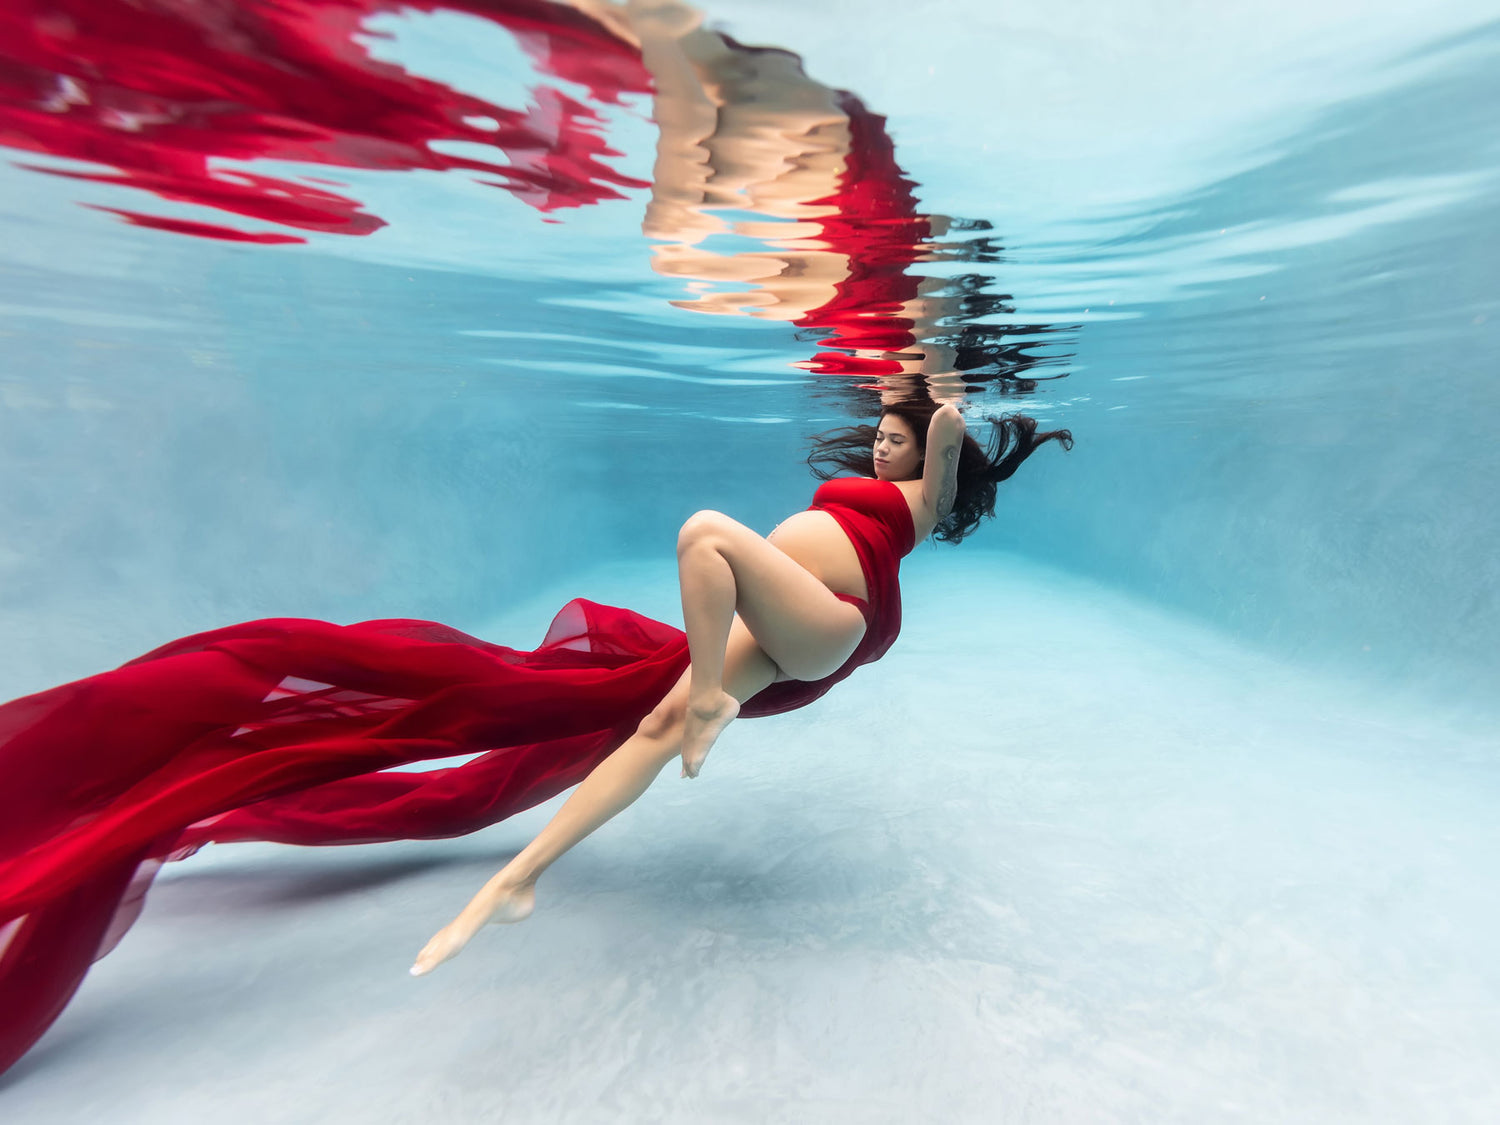 Getting into the Underwater Photography Business with Karen Bagley